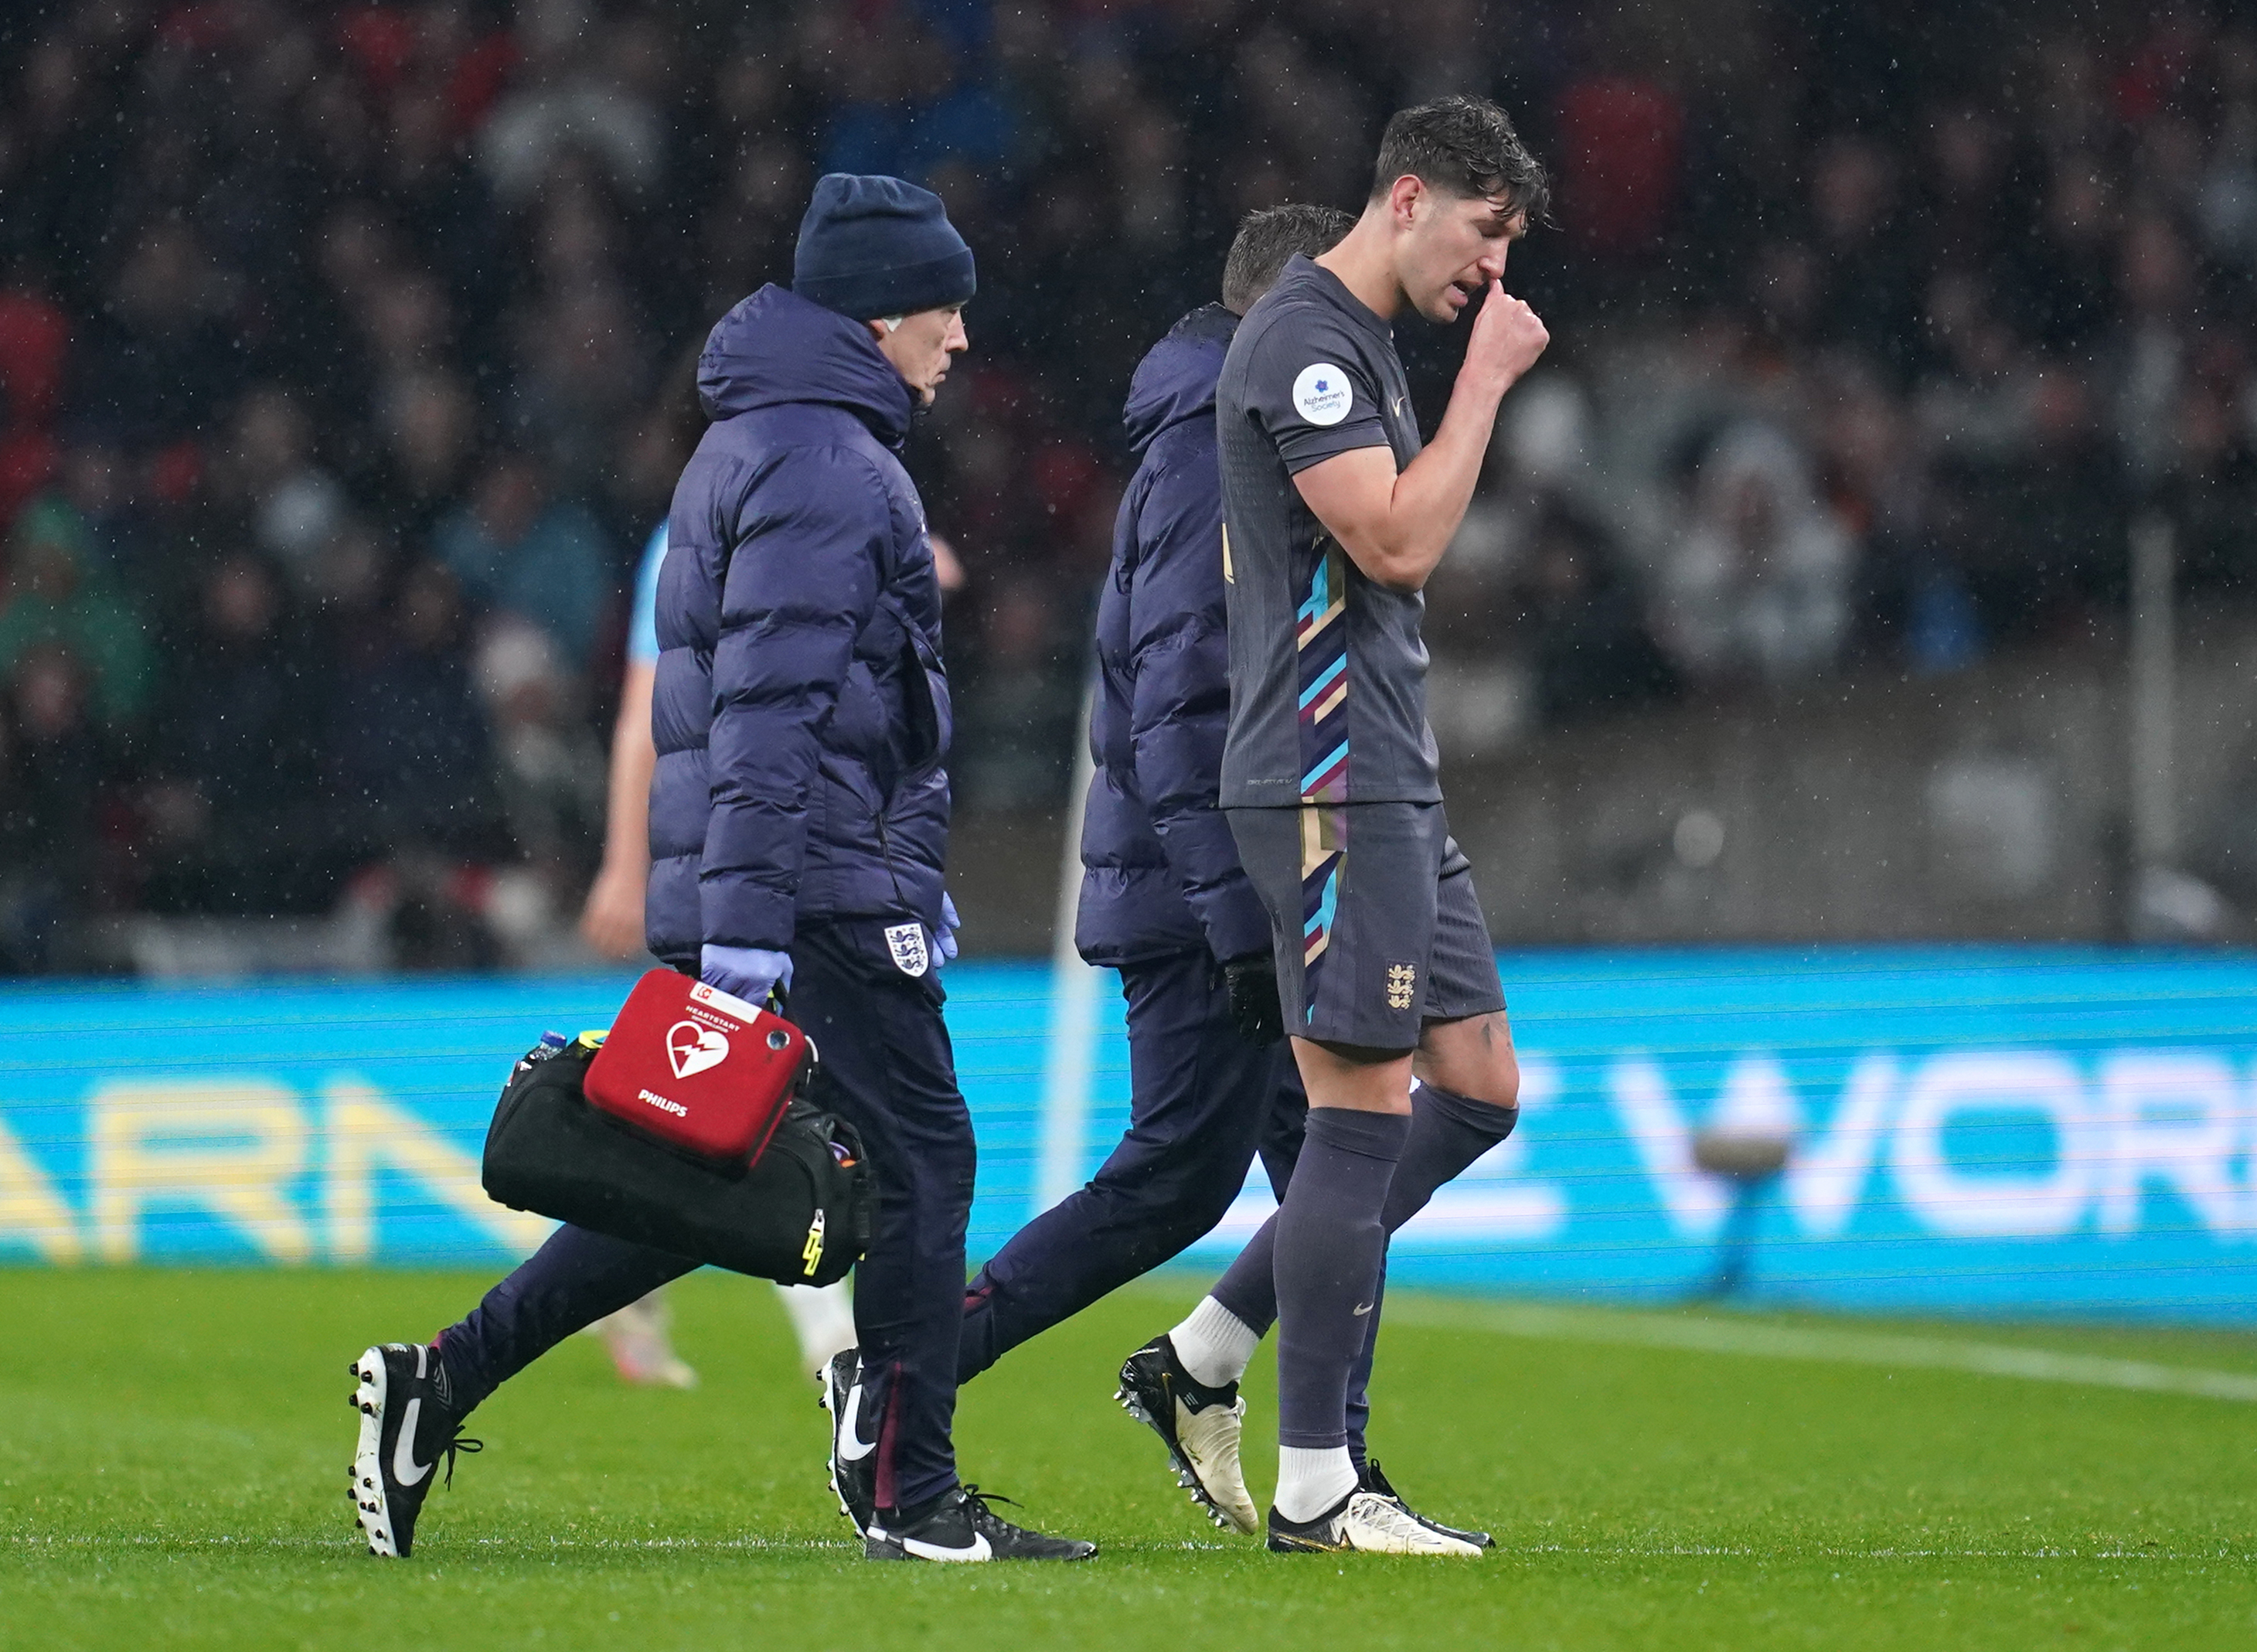 England’s John Stones leaves the pitch with an injury early on against Belgium